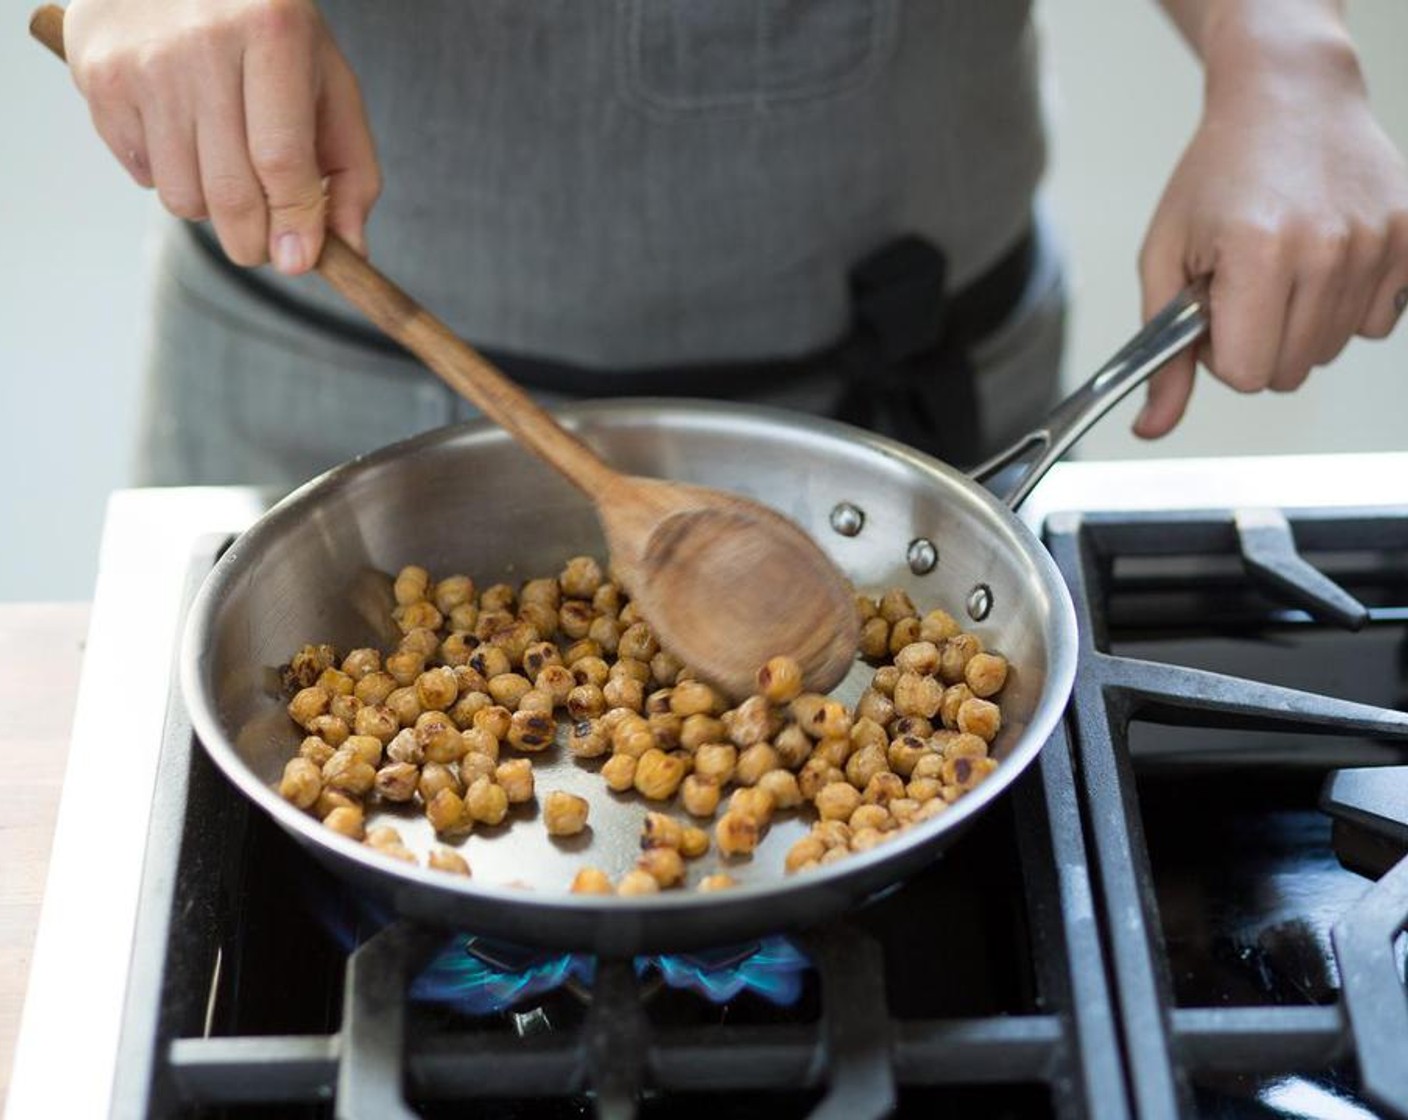 step 4 In a medium sauté pan over high heat, add Olive Oil (1 Tbsp). When the oil is hot, add the Chickpeas (1 can) and sauté for 4 minutes until golden brown. Remove from heat and set aside.